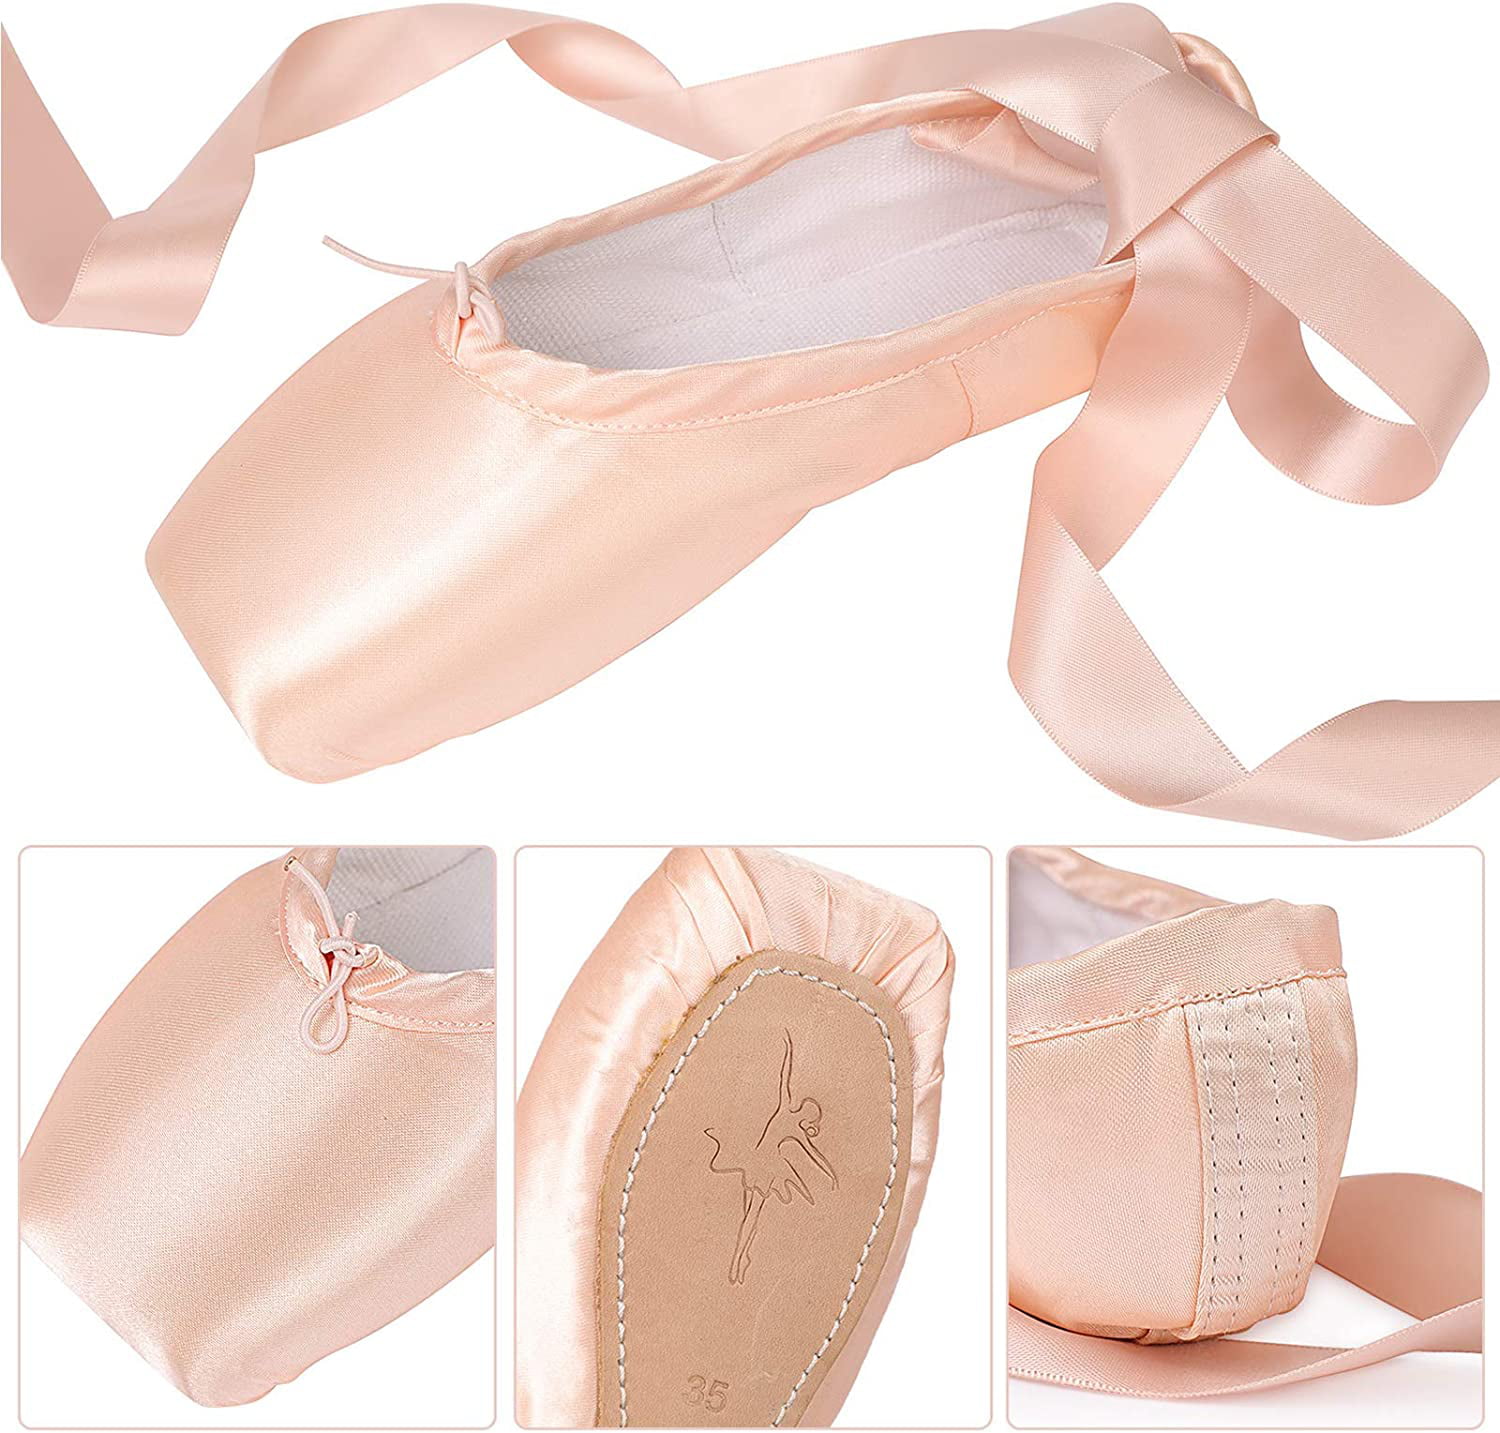  tanzdunsje Ballet Pointe Shoes Pink Professional Dance Shoes  with Sewn Ribbon and Silicone Toe Pads for Girls Women | Ballet & Dance